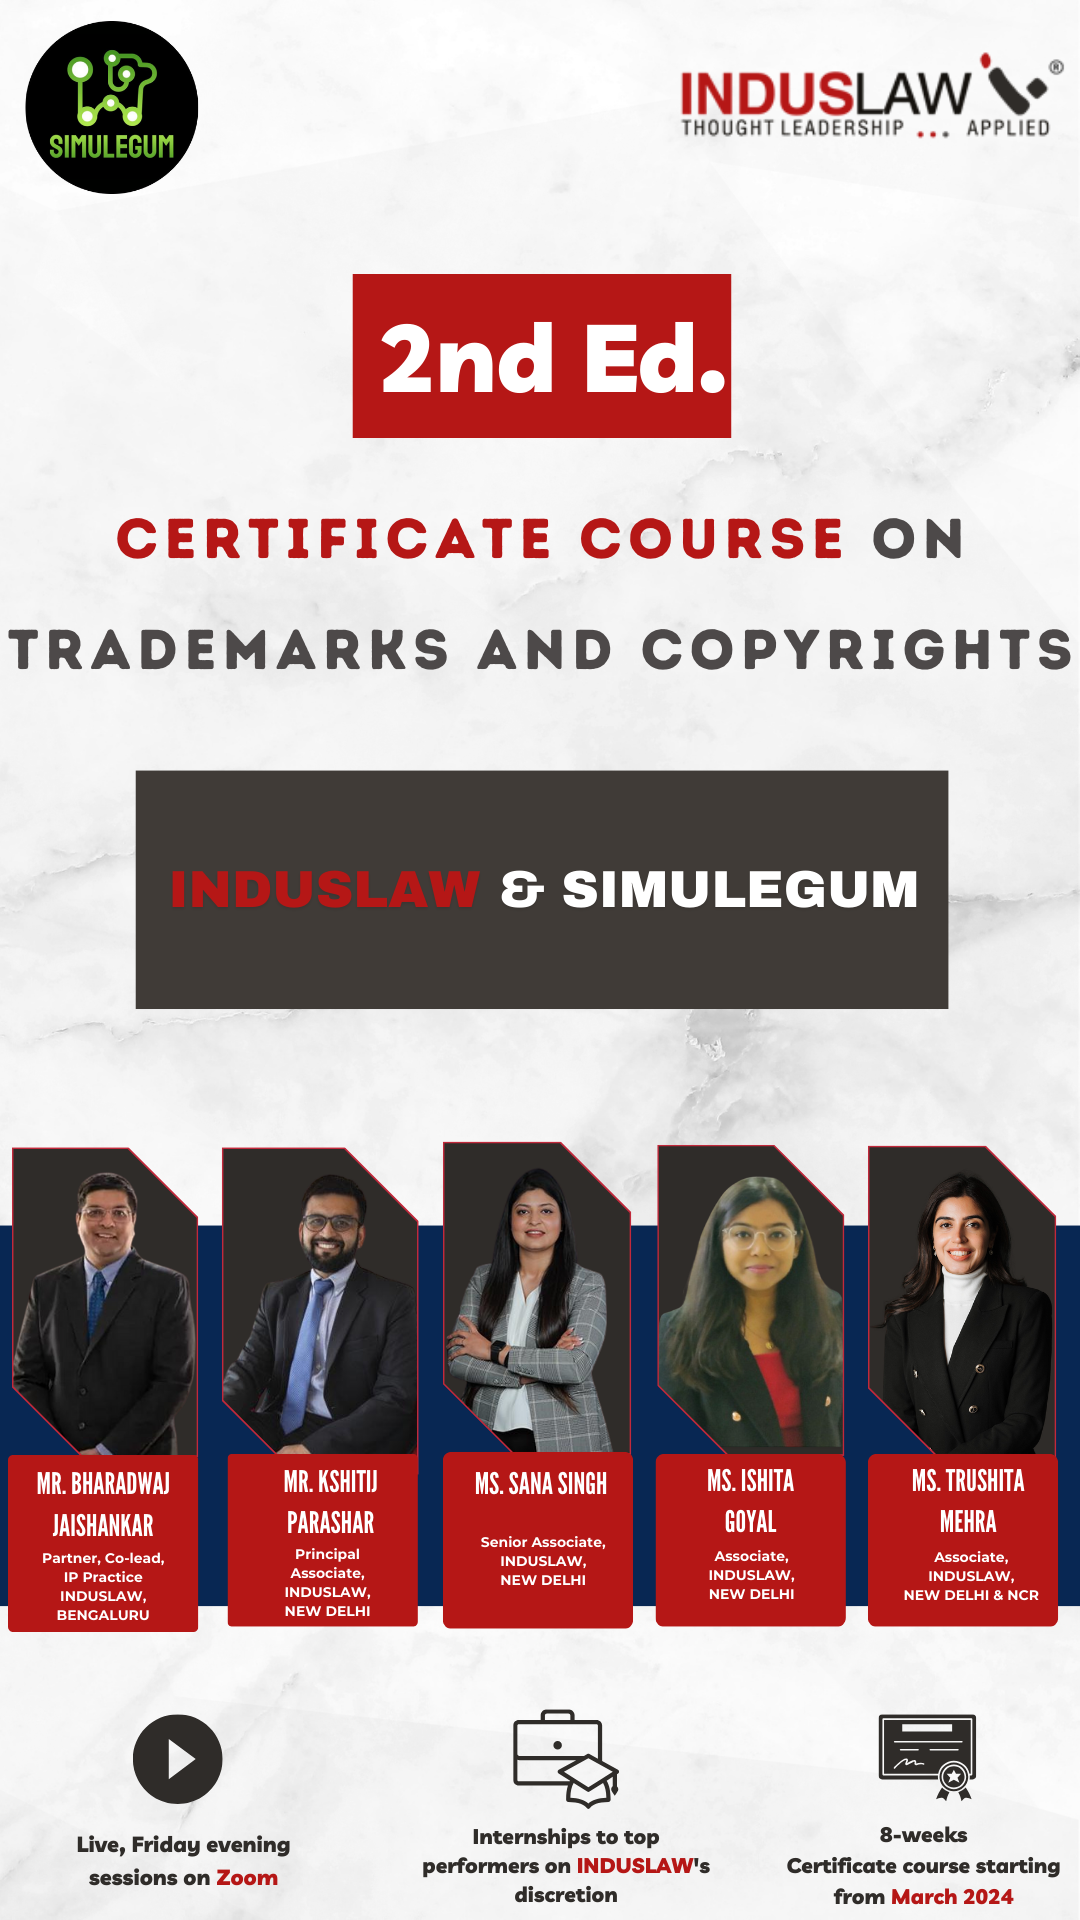 2nd Ed. Certificate Course on Trademarks & Copyrights by IndusLaw and SimuLegum